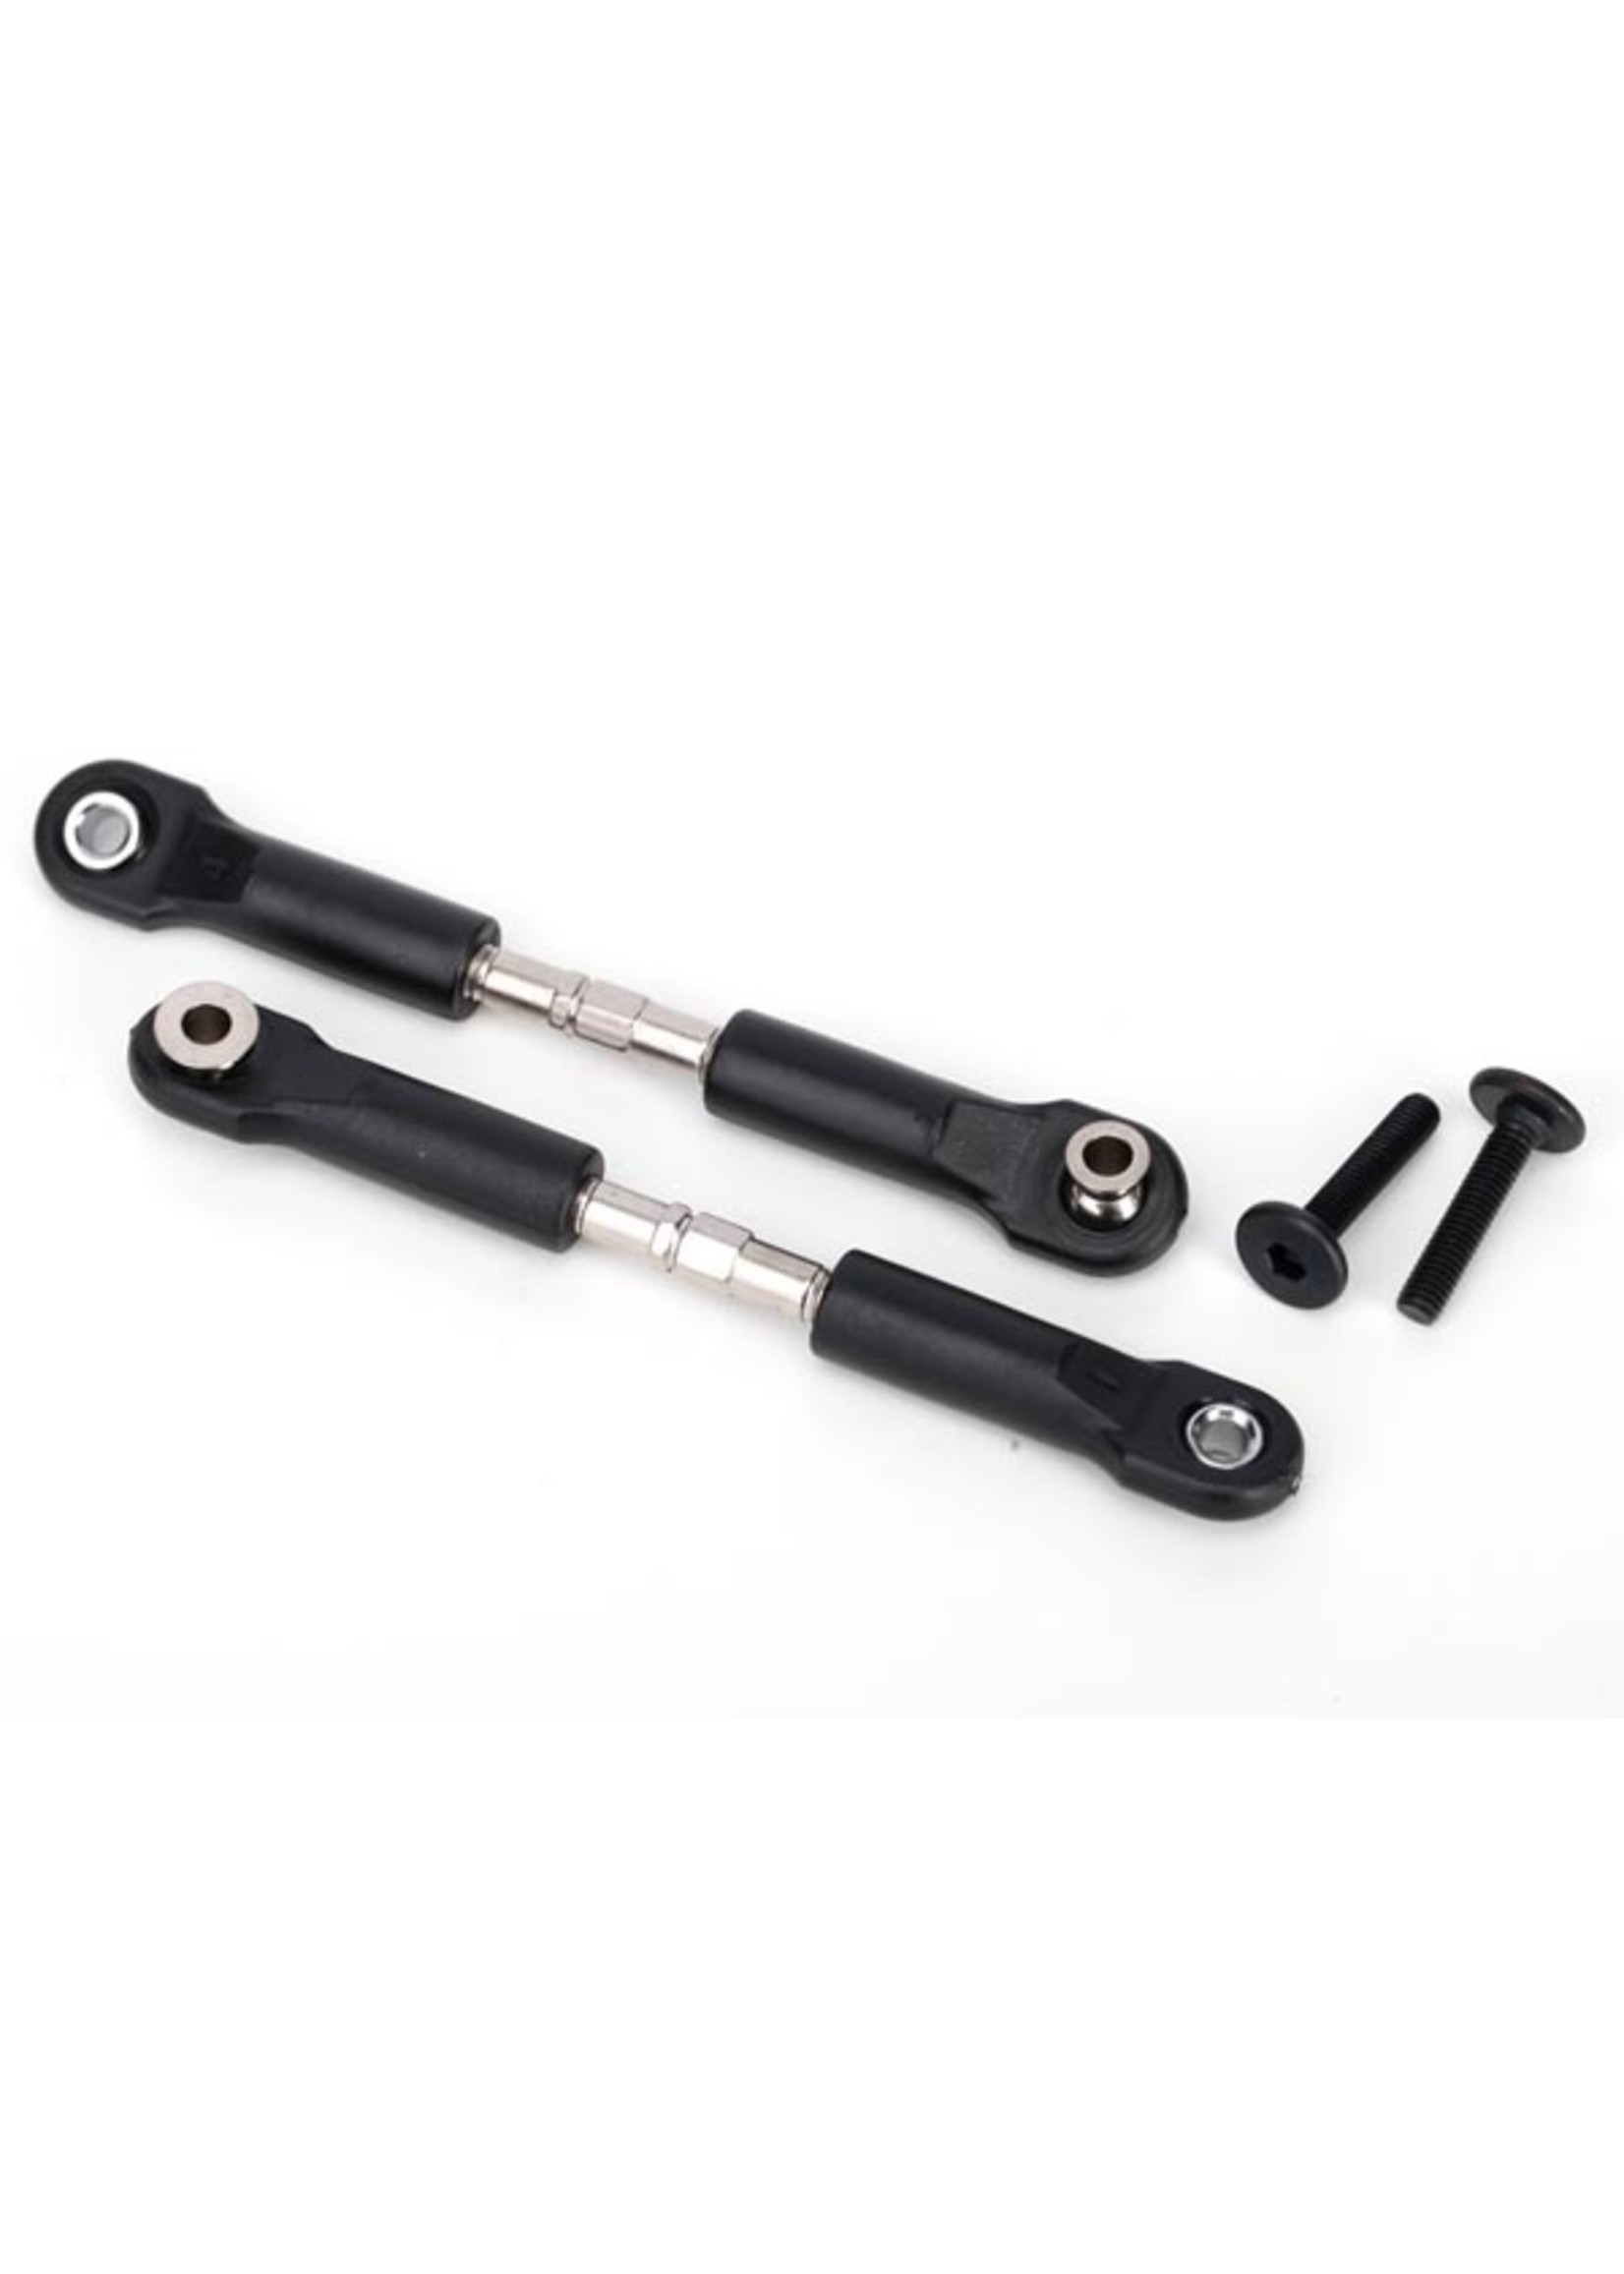 Traxxas 3644 - 39mm Camber Link Turnbuckles (2)